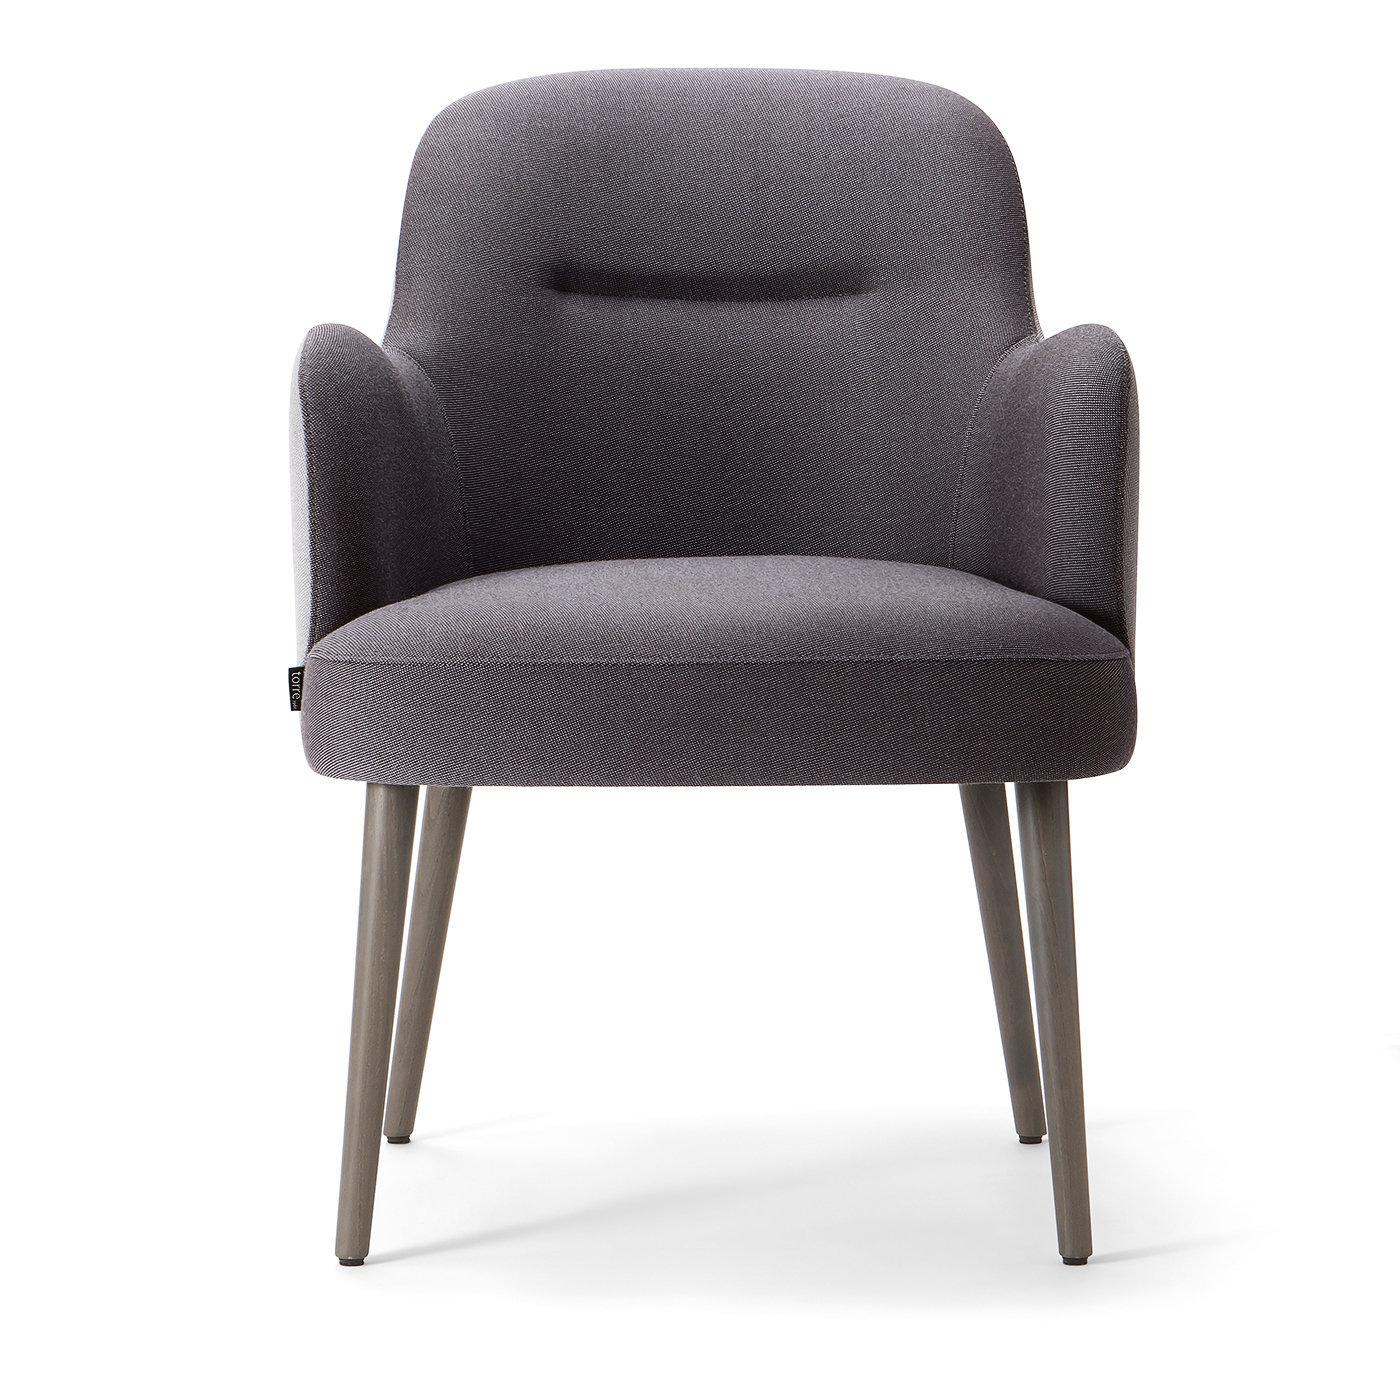 Characterized by a refined tone-on-tone gray hue upholstery (light gray for the back and dark gray for the front), this splendid armchair from the Da Vinci Collection will take center stage in any bedroom or living area with its majestic design.